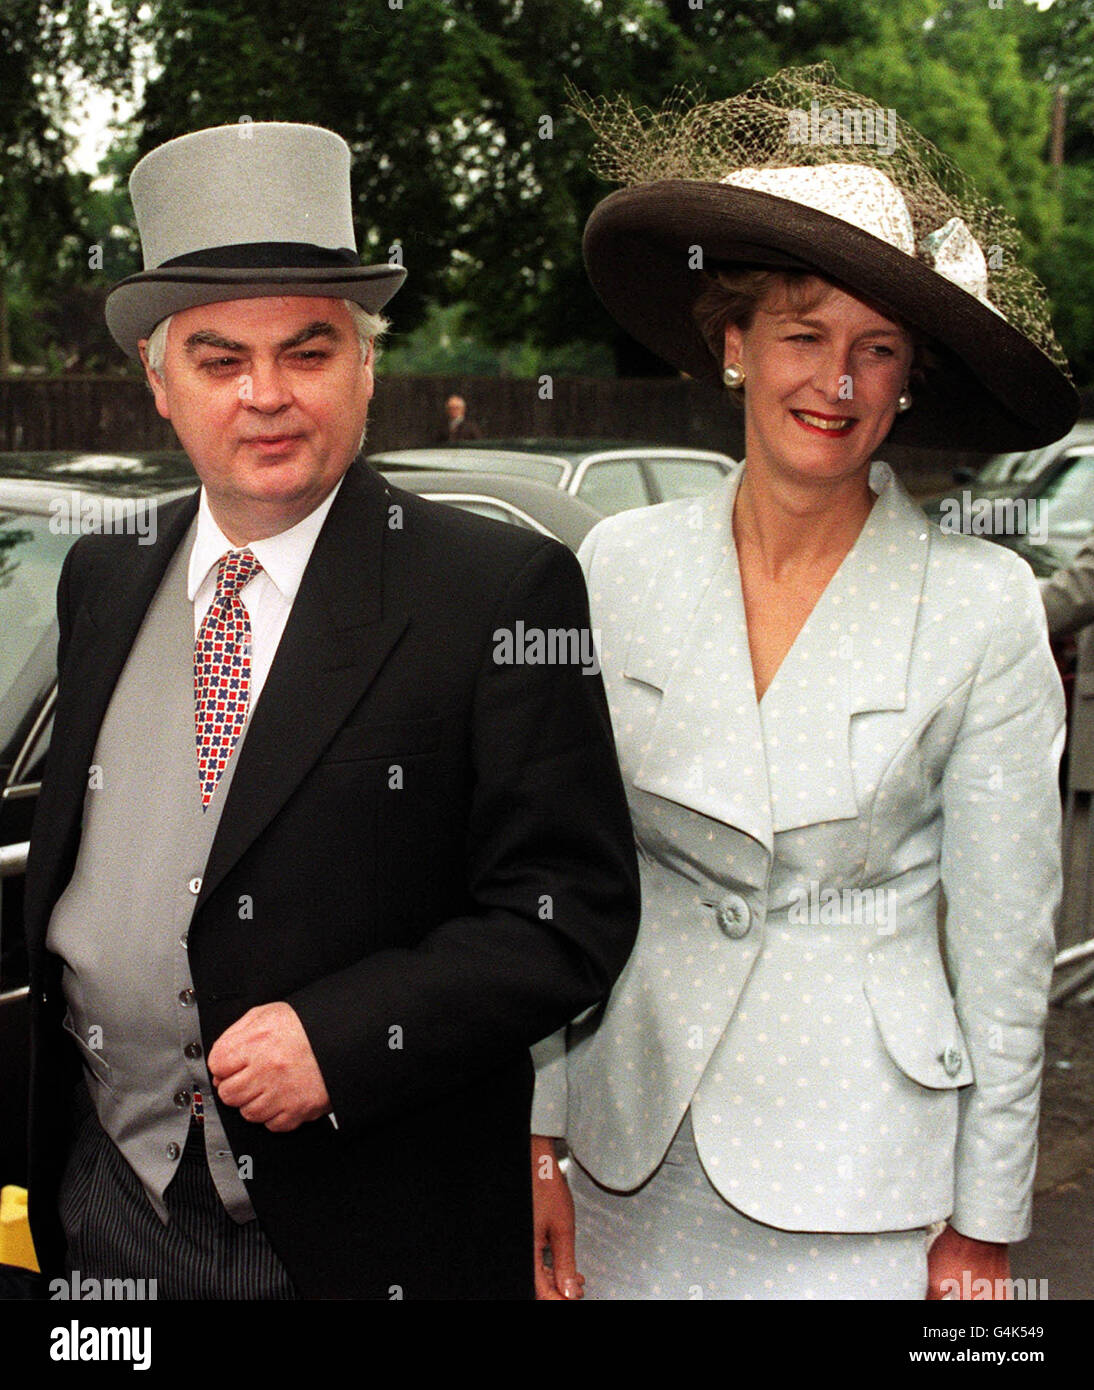 Former Conservative Chancellor of the Exchequer Norman Lamont, and his wife, Rosemary, at the Royal Enclosure at Ascot. 22/4/99 Lord Lamont and his wife Rosemary have decided to divorce, according to a statement issued on their behalf. * The statement said: Lord and Lady Lamont with regret have decided to end their marriage and to divorce. No one else is involved. There will be no further comment. The statement was issued by Spada, a corporate marketing and communications company in London's Harley Street. Stock Photo